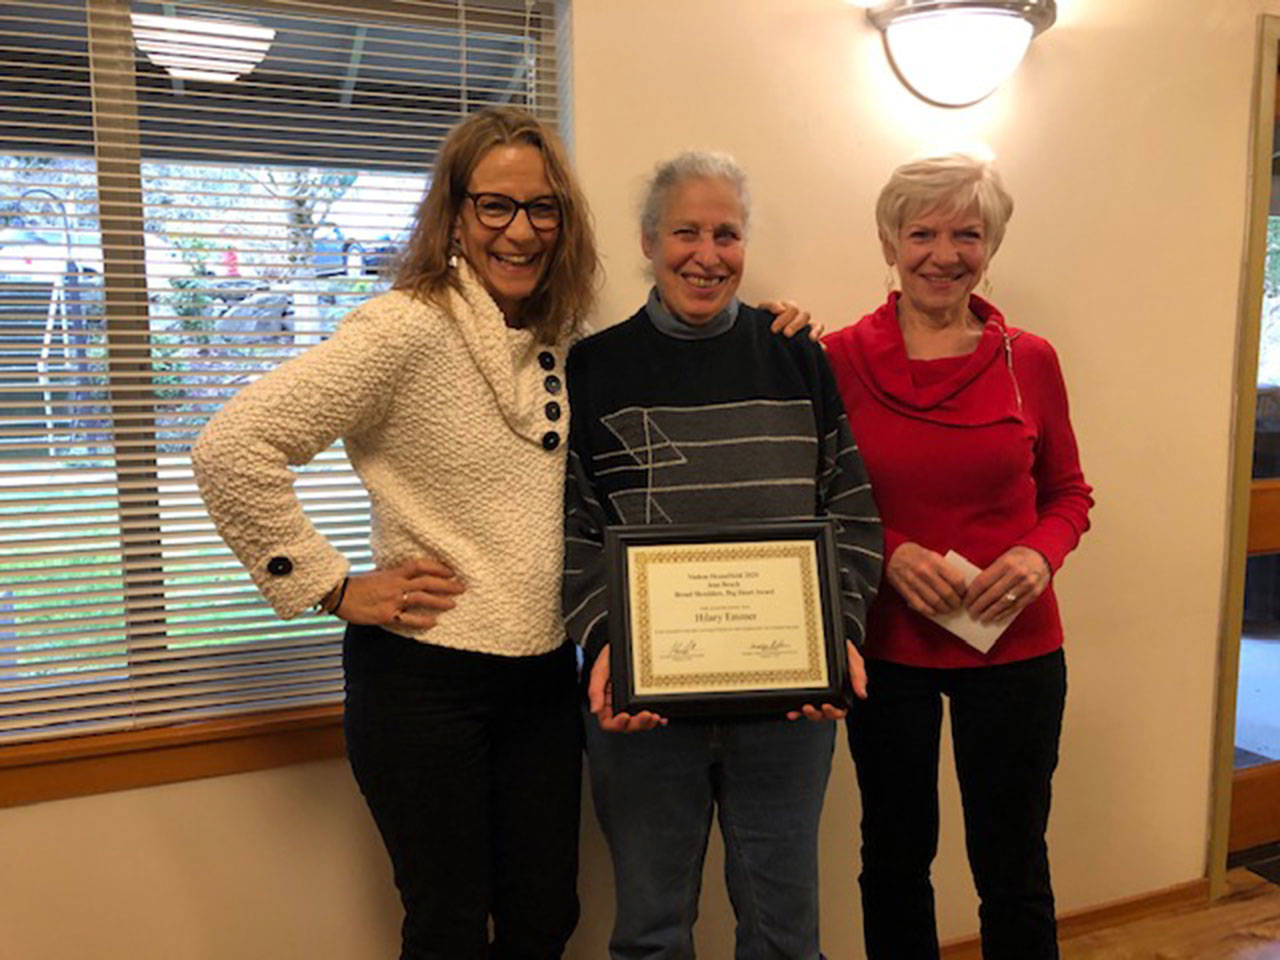 (From left to right): Vashon HouseHold Board Vice President Leslie Ferriel, Hilary Emmer, and board president Carolyn Wilber (Courtesy Photo).